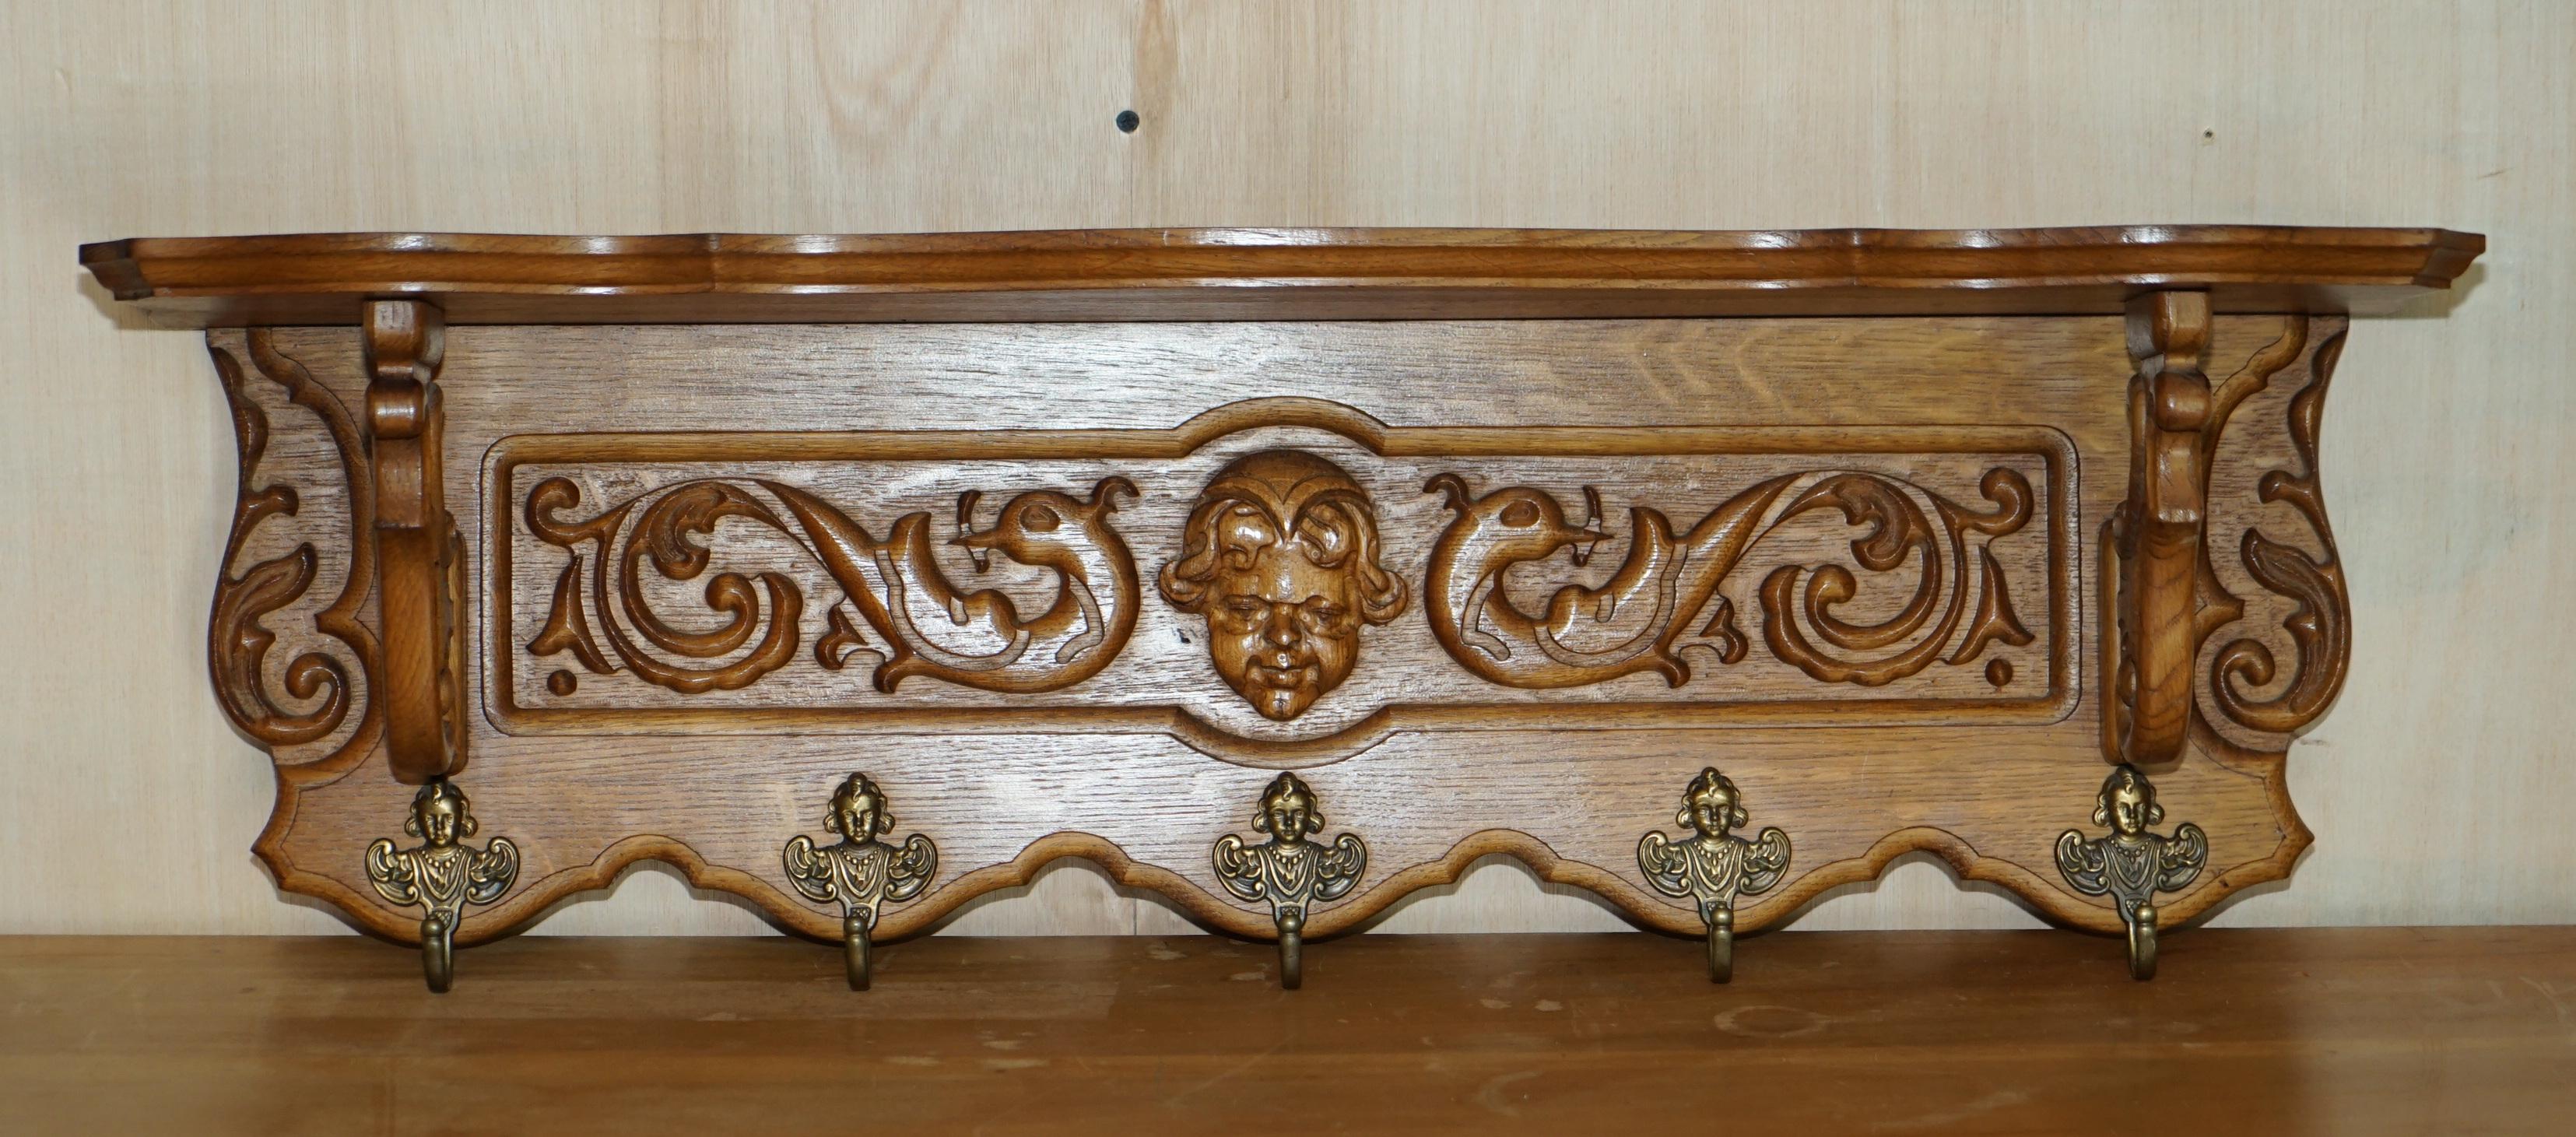 We are delighted to offer for sale this lovely, heavily carved Dutch oak wall hanging coat hat and scarf rack with French Royalty head gold gilt brass hooks and large Cherub head carved to the central middle 

A very good looking well made and